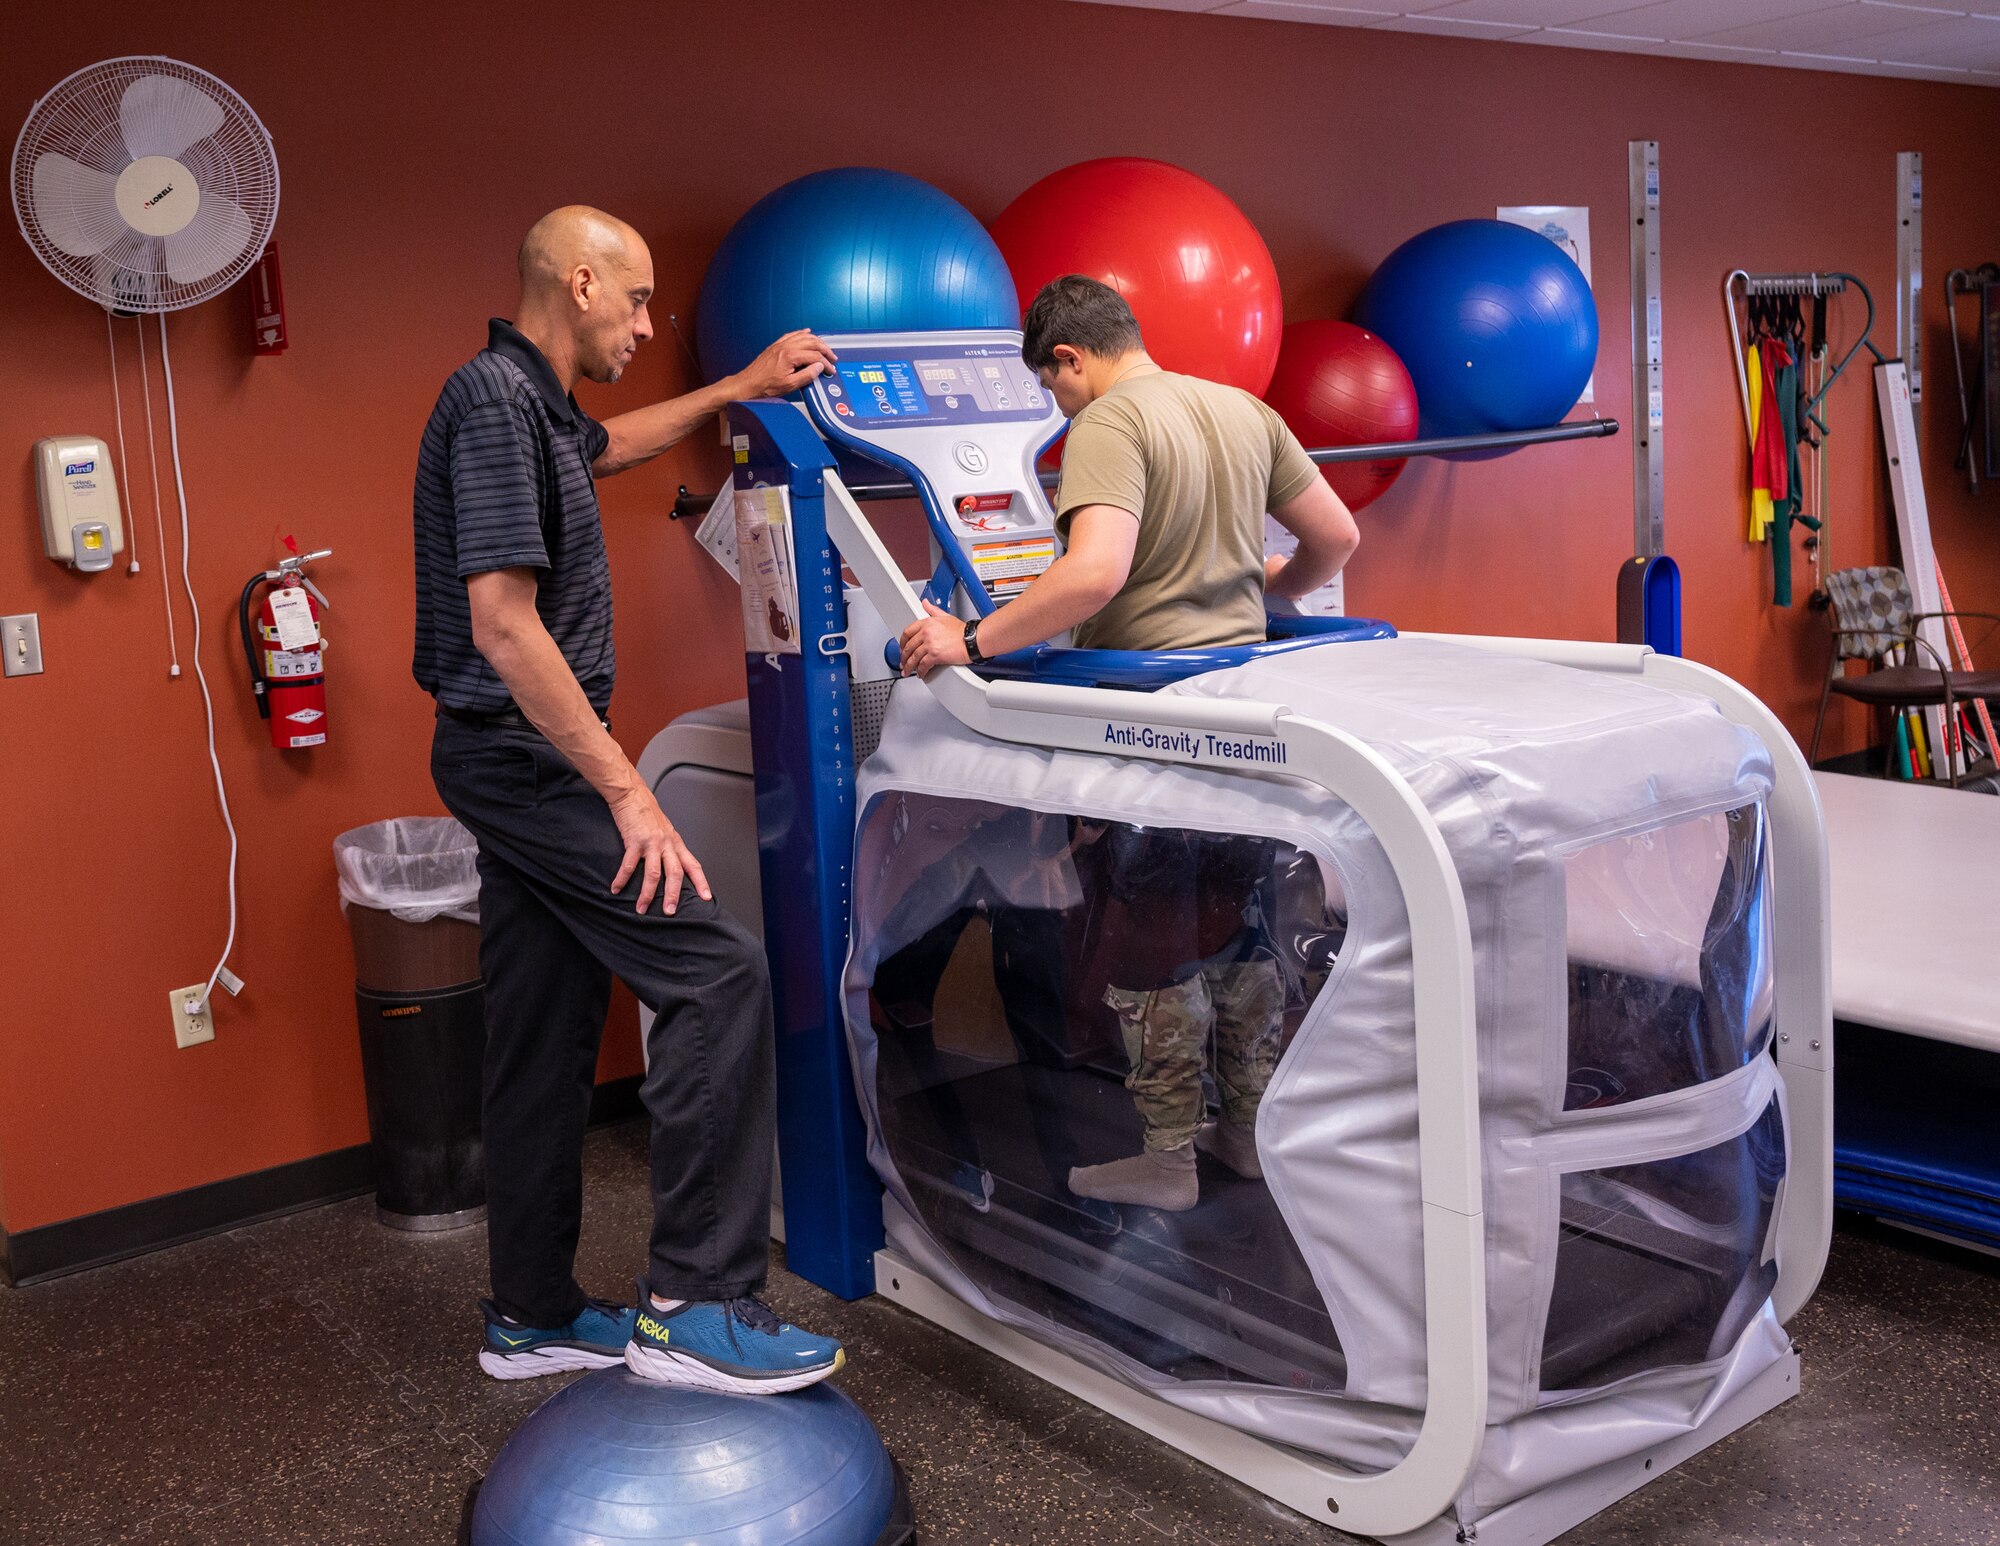 Percel Crudup, 56th Medical Group physical therapy assistant, assists U.S. Air Force Airman 1st Class Elias Carrero, 56th Fighter Wing public affairs specialist, while he runs on an Anti-Gravity Treadmill, June 15, 2023, at Luke Air Force Base, Arizona.